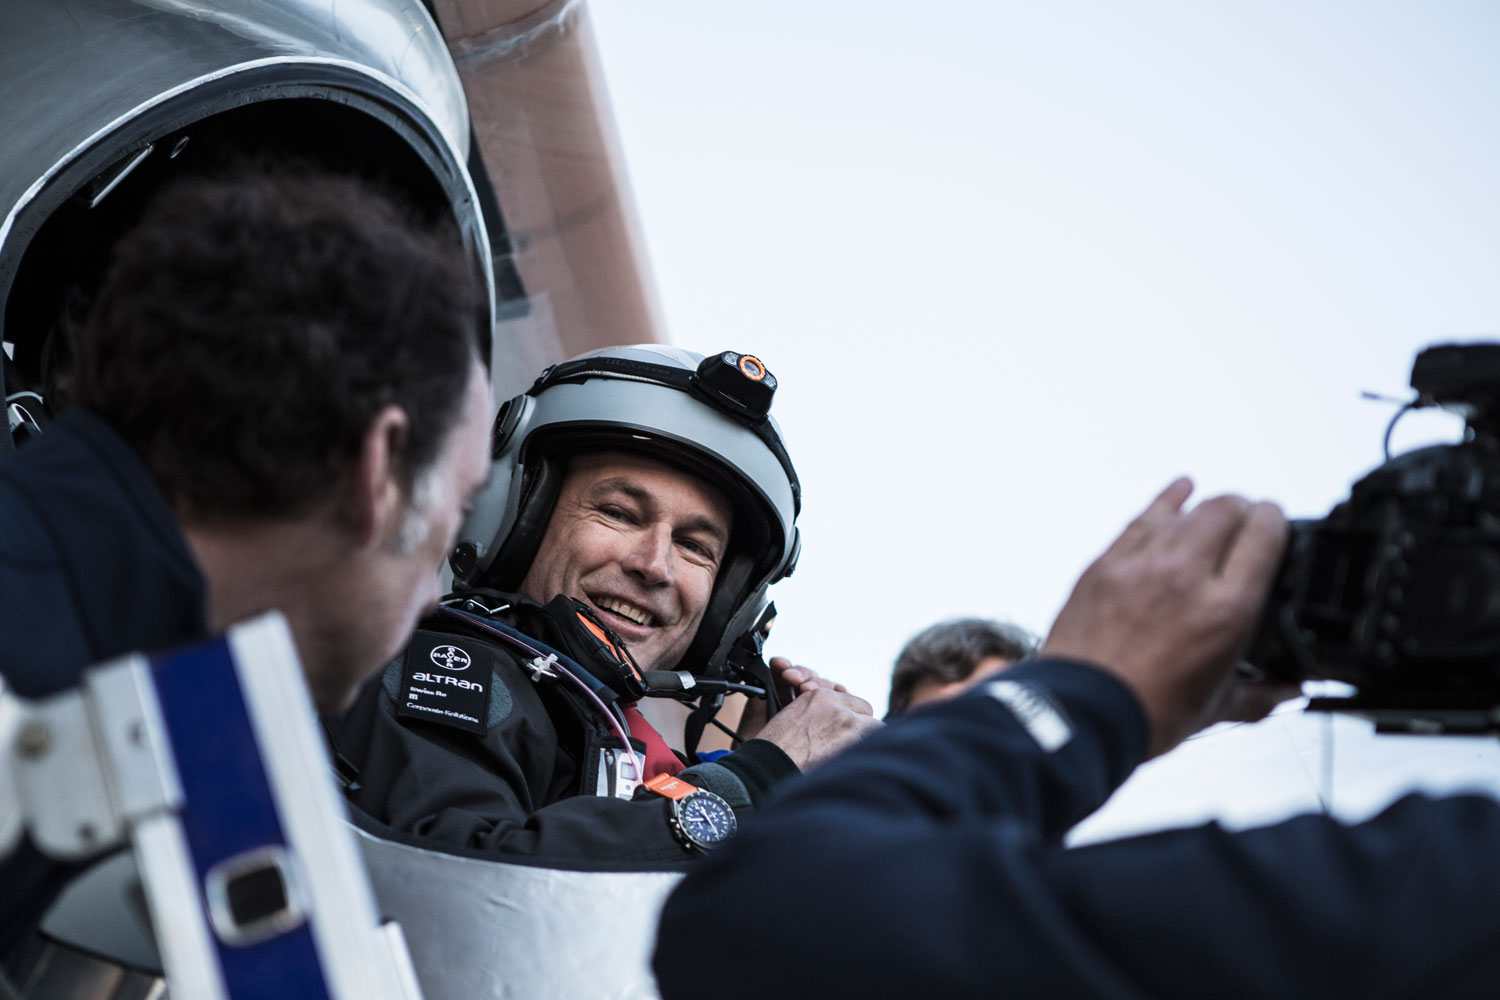 The pilot Bertrand Piccard, initiator and President of the Solar Impulse project, will be flying over the San Francisco Bay area and pass over the Golden Gate Bridge.